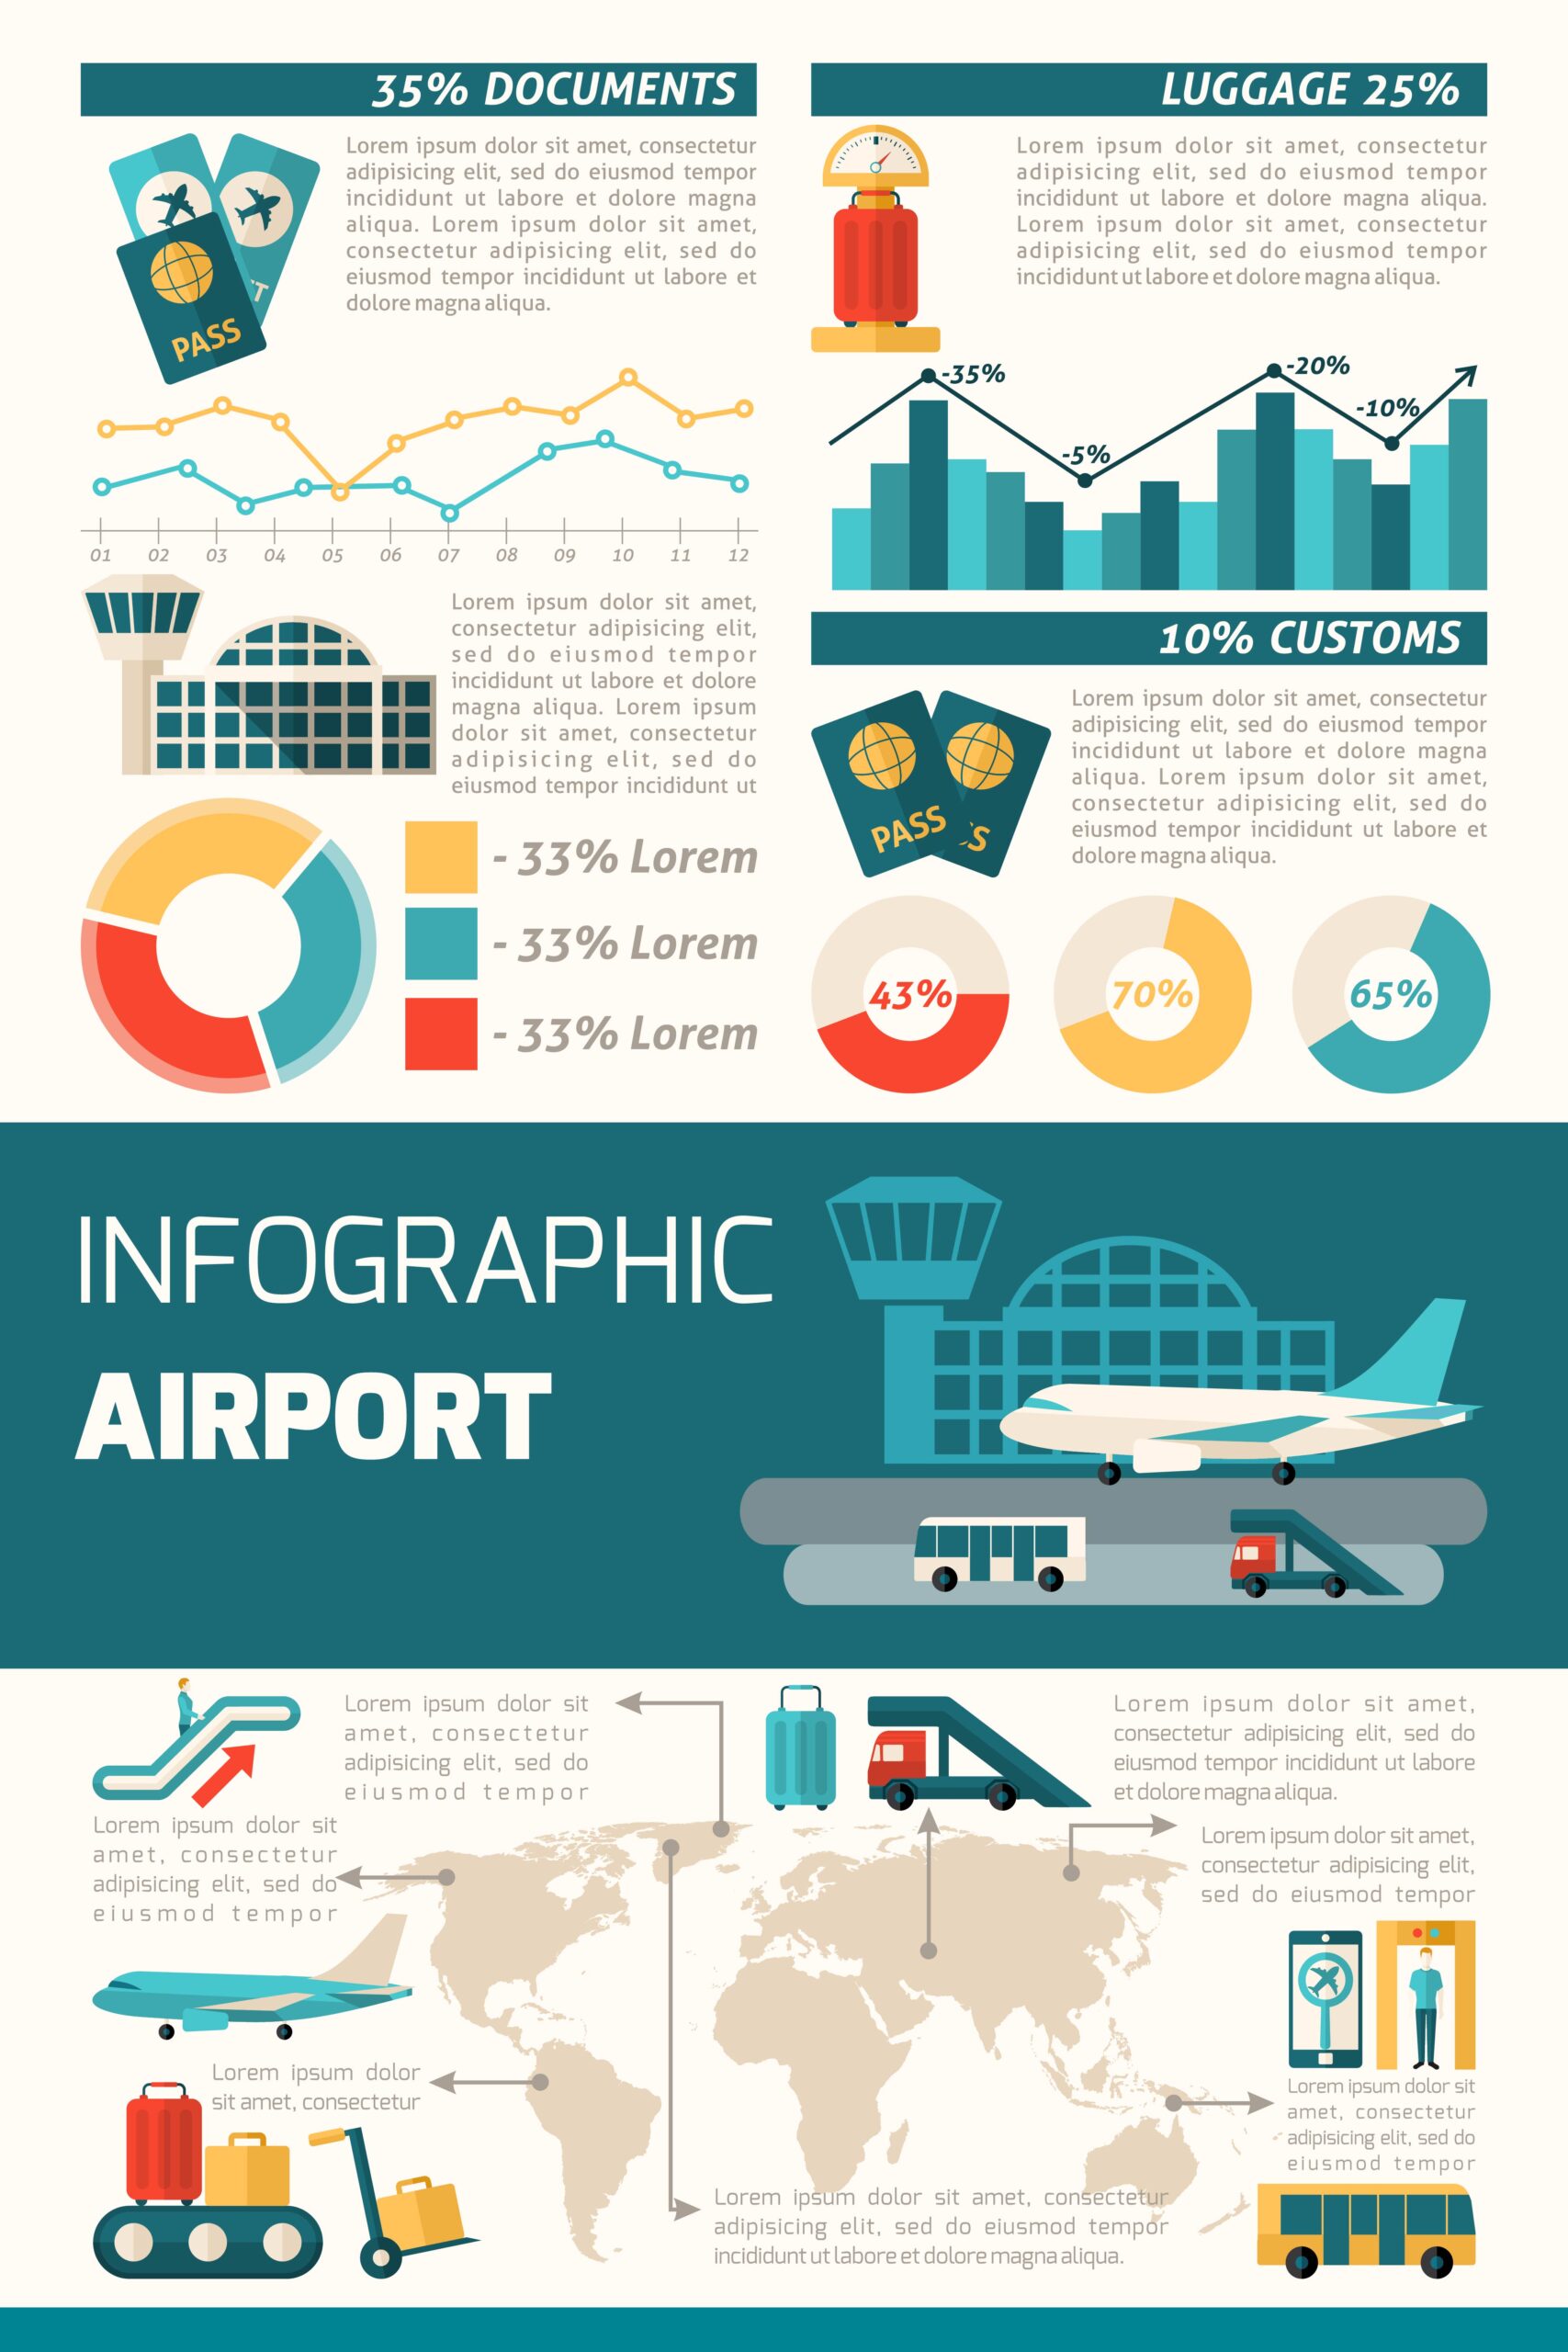 2014 Success #5: Why & How You Should Create Infographics for Your Company - Express Writers